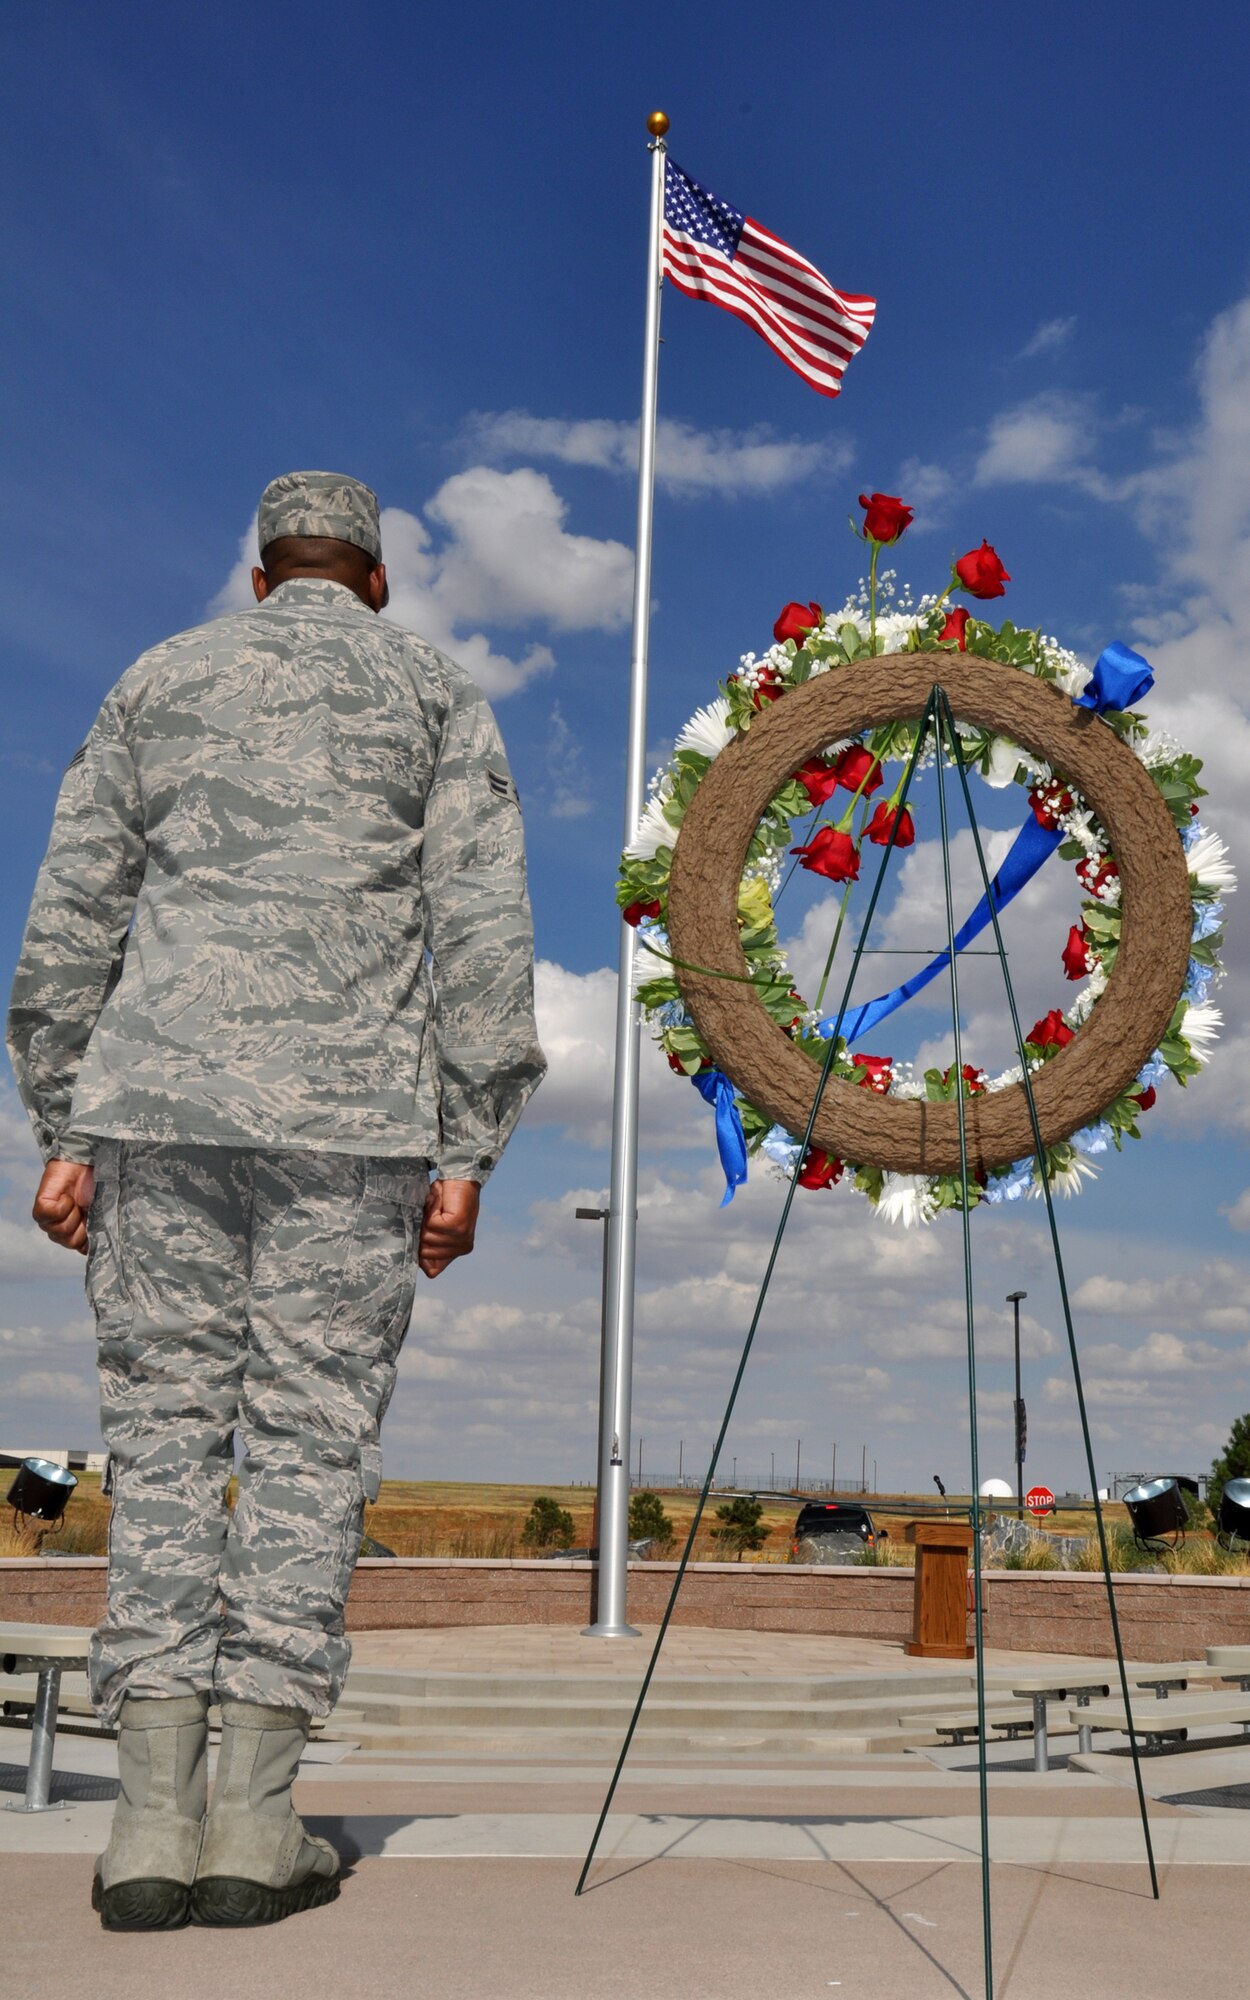 BUCKLEY AIR FORCE BASE, Colo. -- Airman 1st Class Waddell Howard, 460th Operations Group, honors the fallen in front of the base flag Sept. 9, 2011. Acting as silent guardians at Buckley's Patriot Day vigil, members stood watch in 30 minute shifts starting at 8:46 a.m.(U.S. Air Force photo by 2nd Lt. Rachel Freeman)